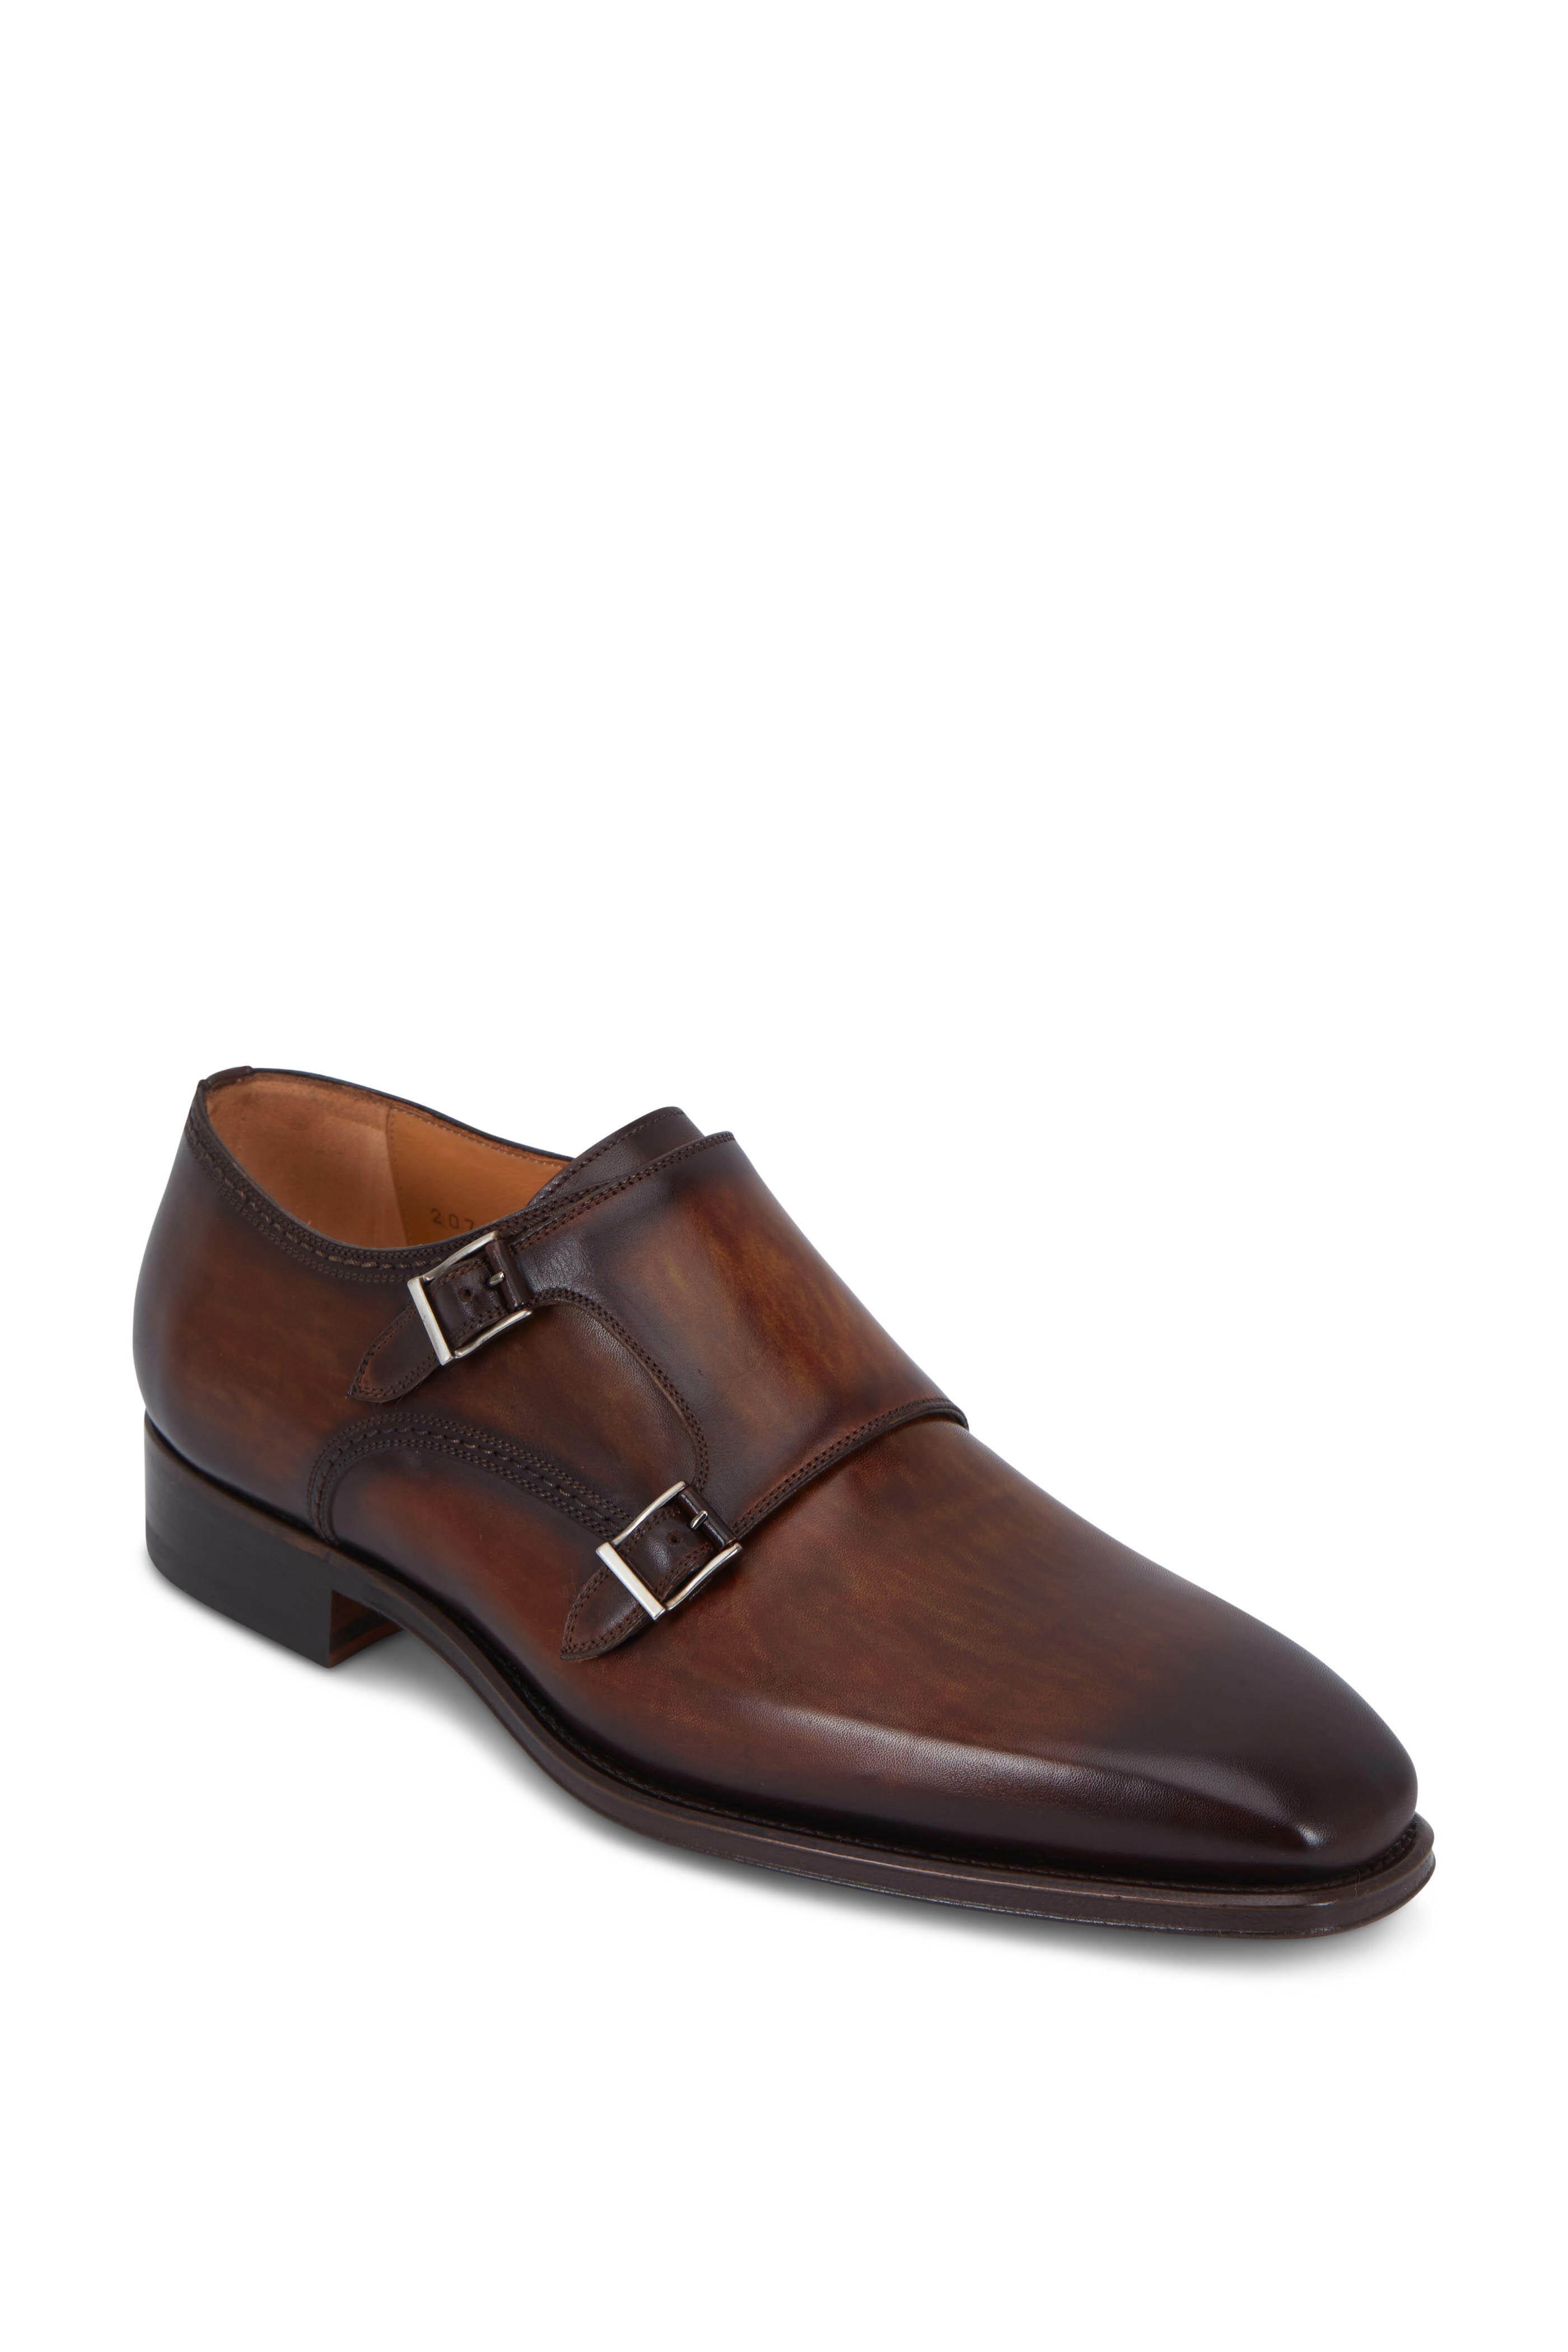 Buckled Urban Style: Magnanni Buckle Shoes